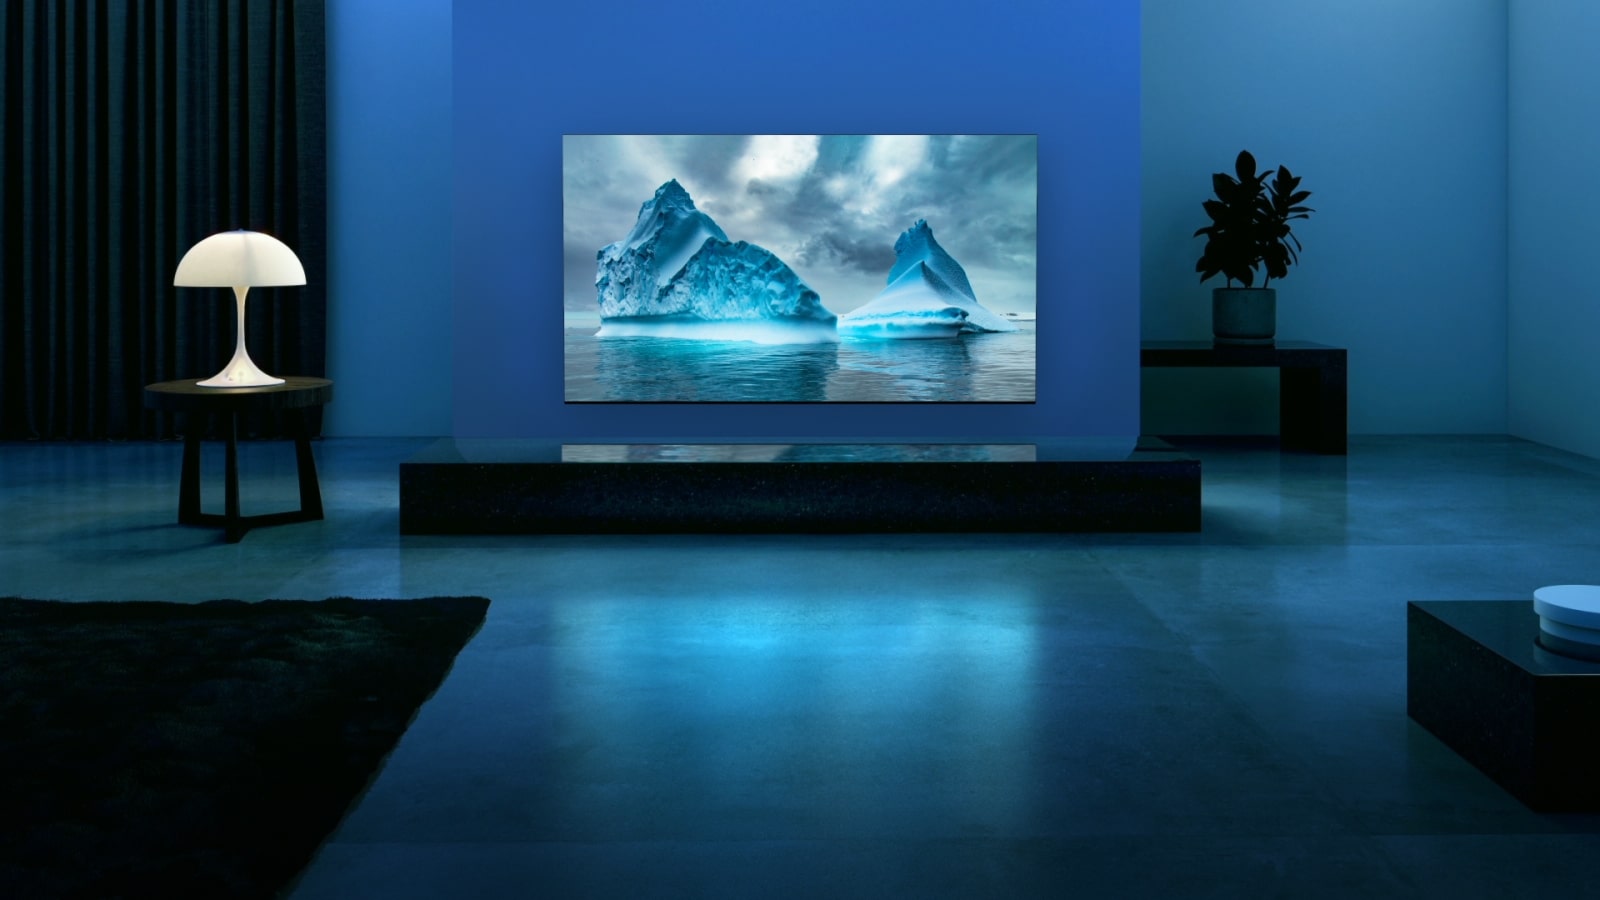 A blue neon circuit moves around on blue glacier image. The camera zooms out and shows this blue glacier within TV screen. The TV is placed in a wide living room with blue background. 